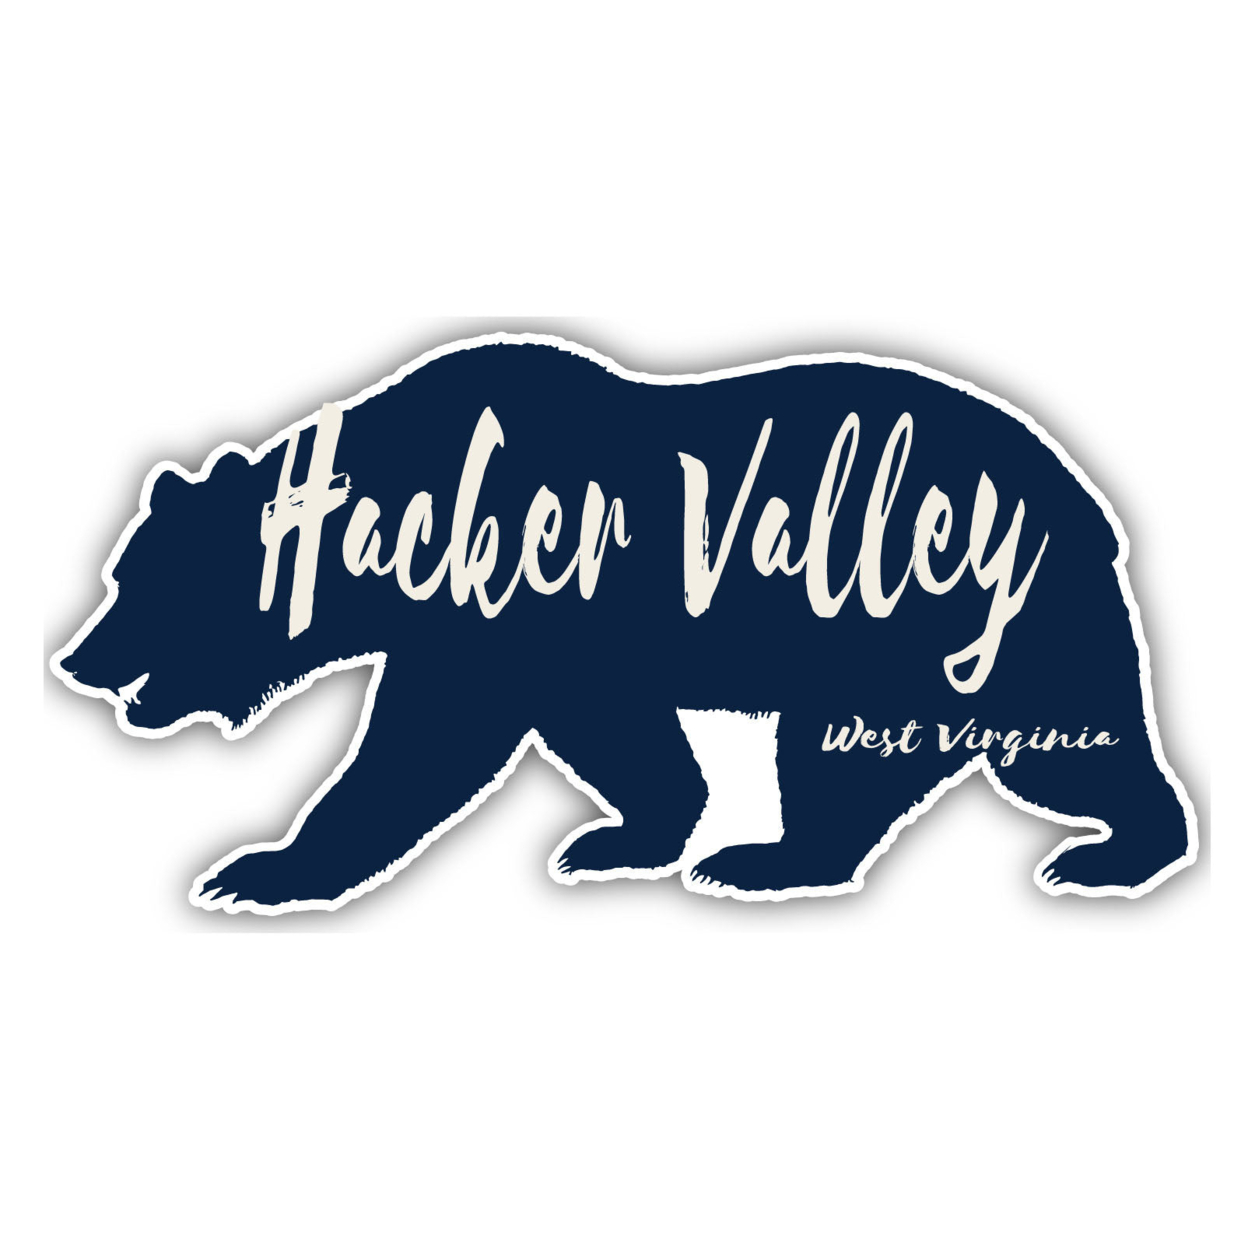 Hacker Valley West Virginia Souvenir Decorative Stickers (Choose Theme And Size) - 4-Pack, 8-Inch, Great Outdoors